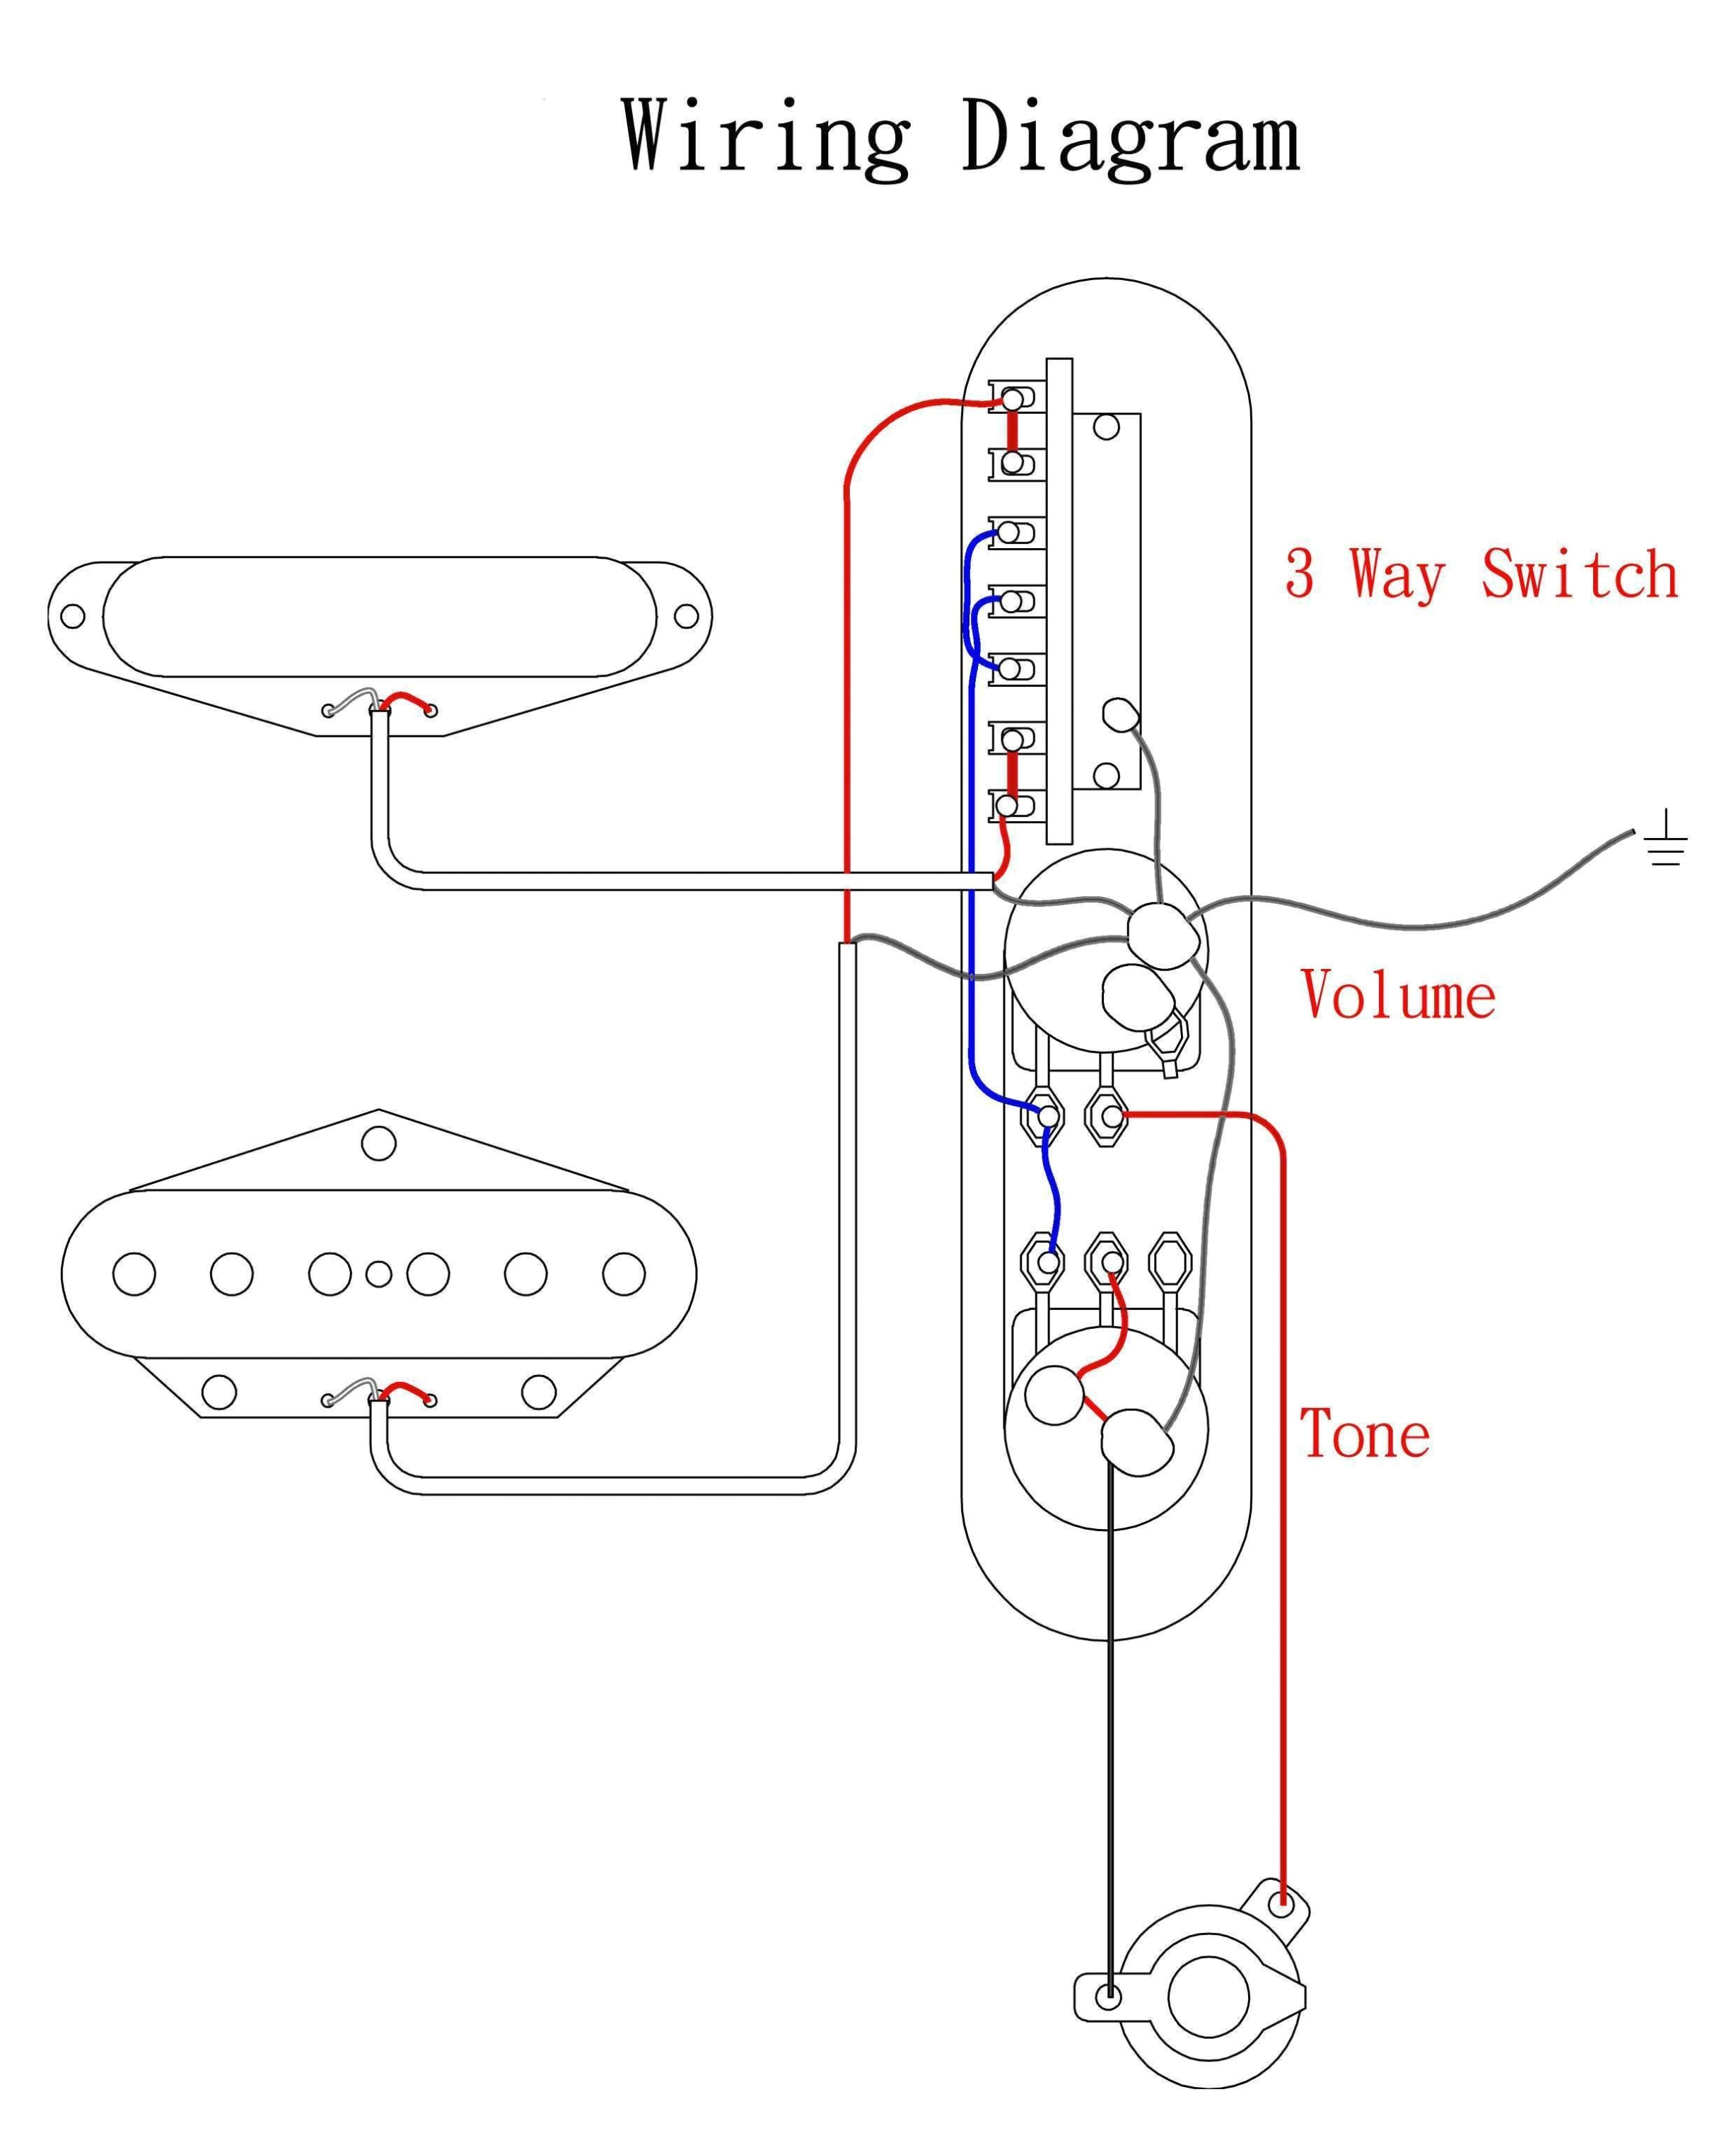 image result for how to wire a 3 way switch ceiling fan with light diagram